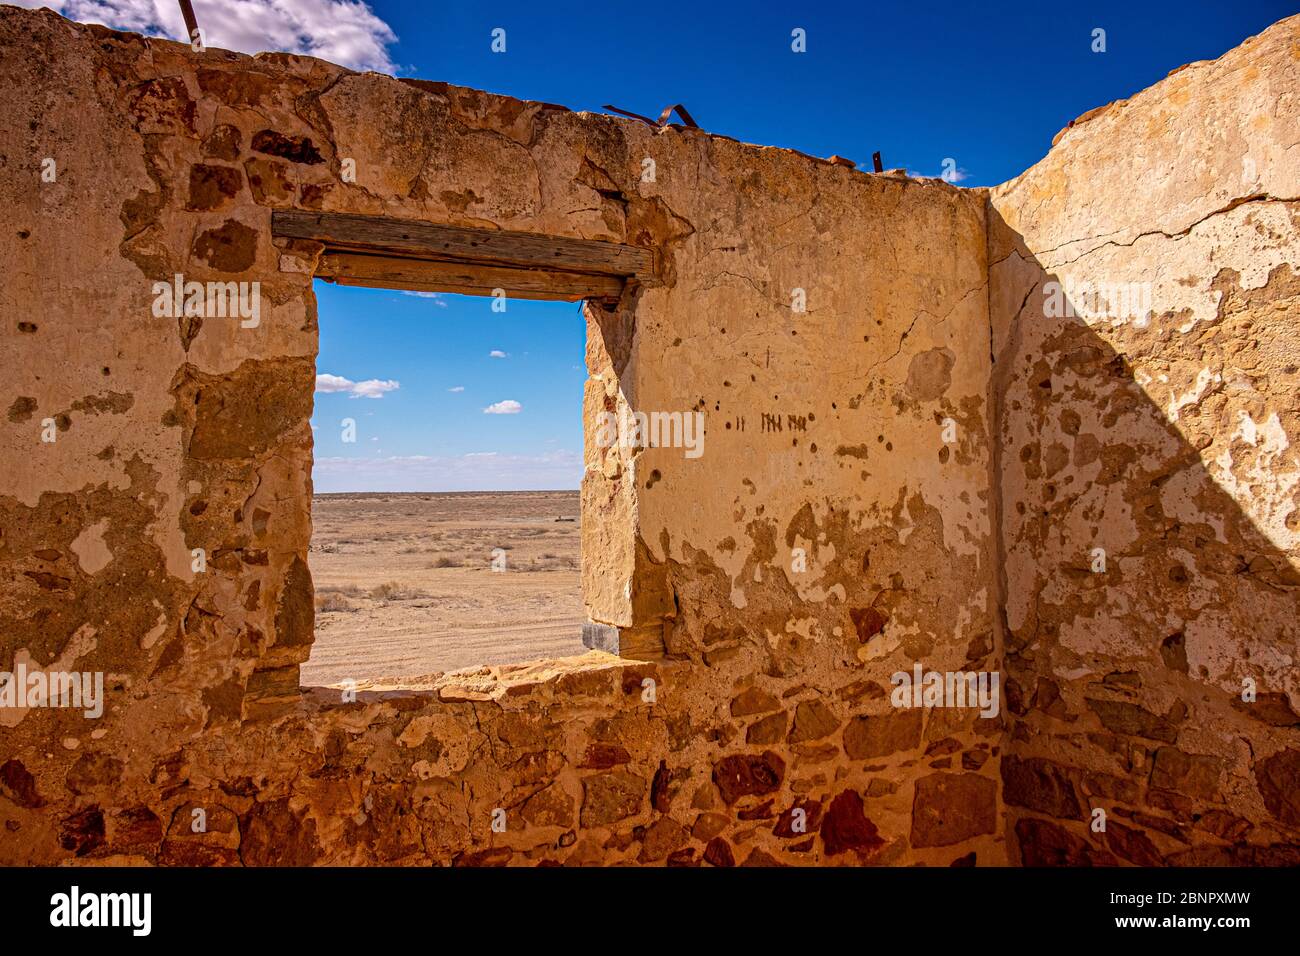 Margaret Siding on the Old Ghan Railway near Lake Eyre in outback South Australia. Stock Photo